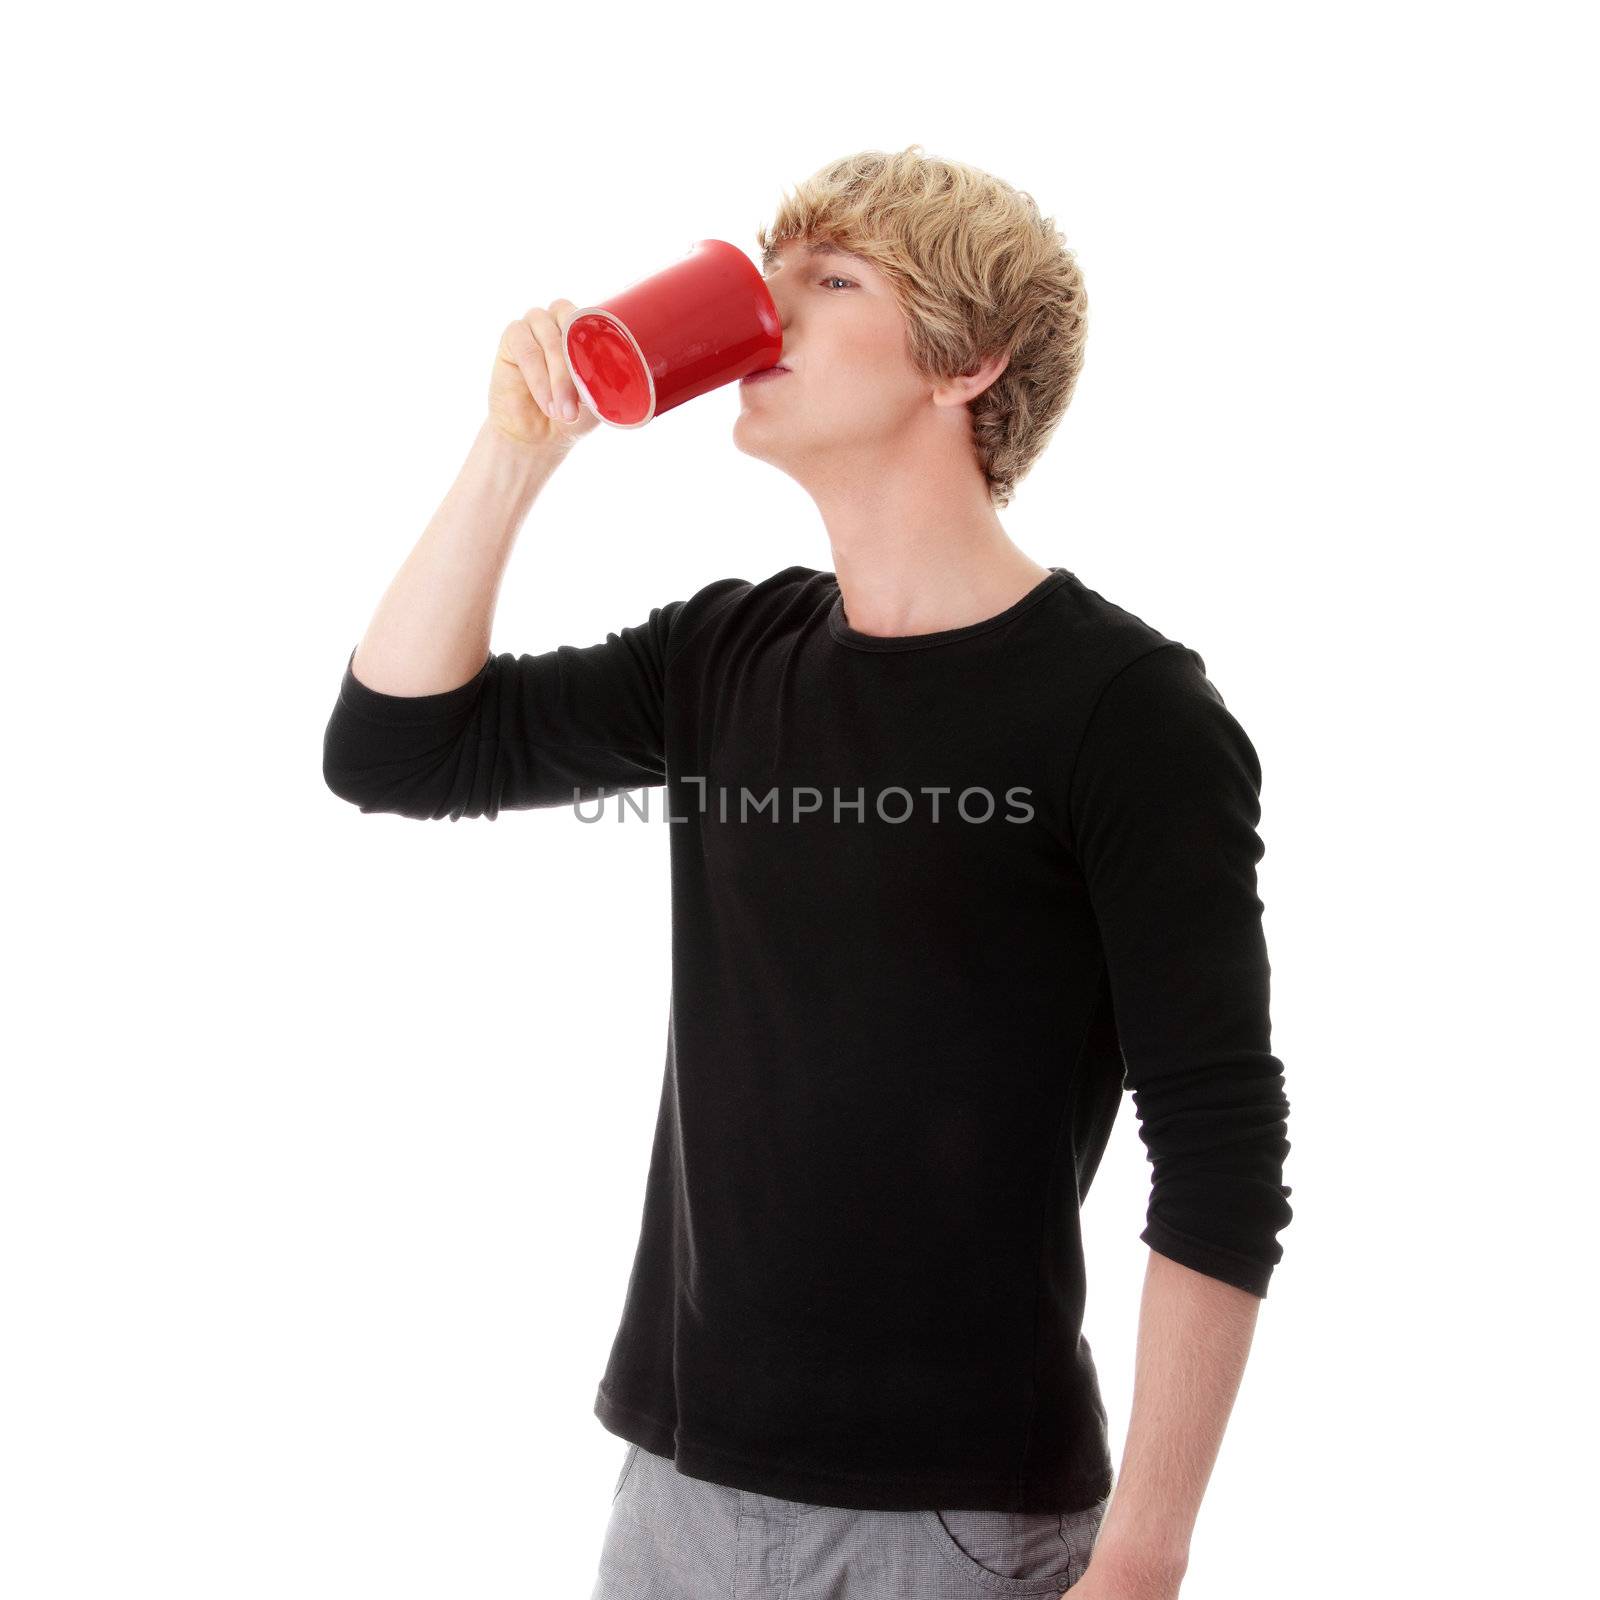 Man drinking a coffee or tea isolated on white background